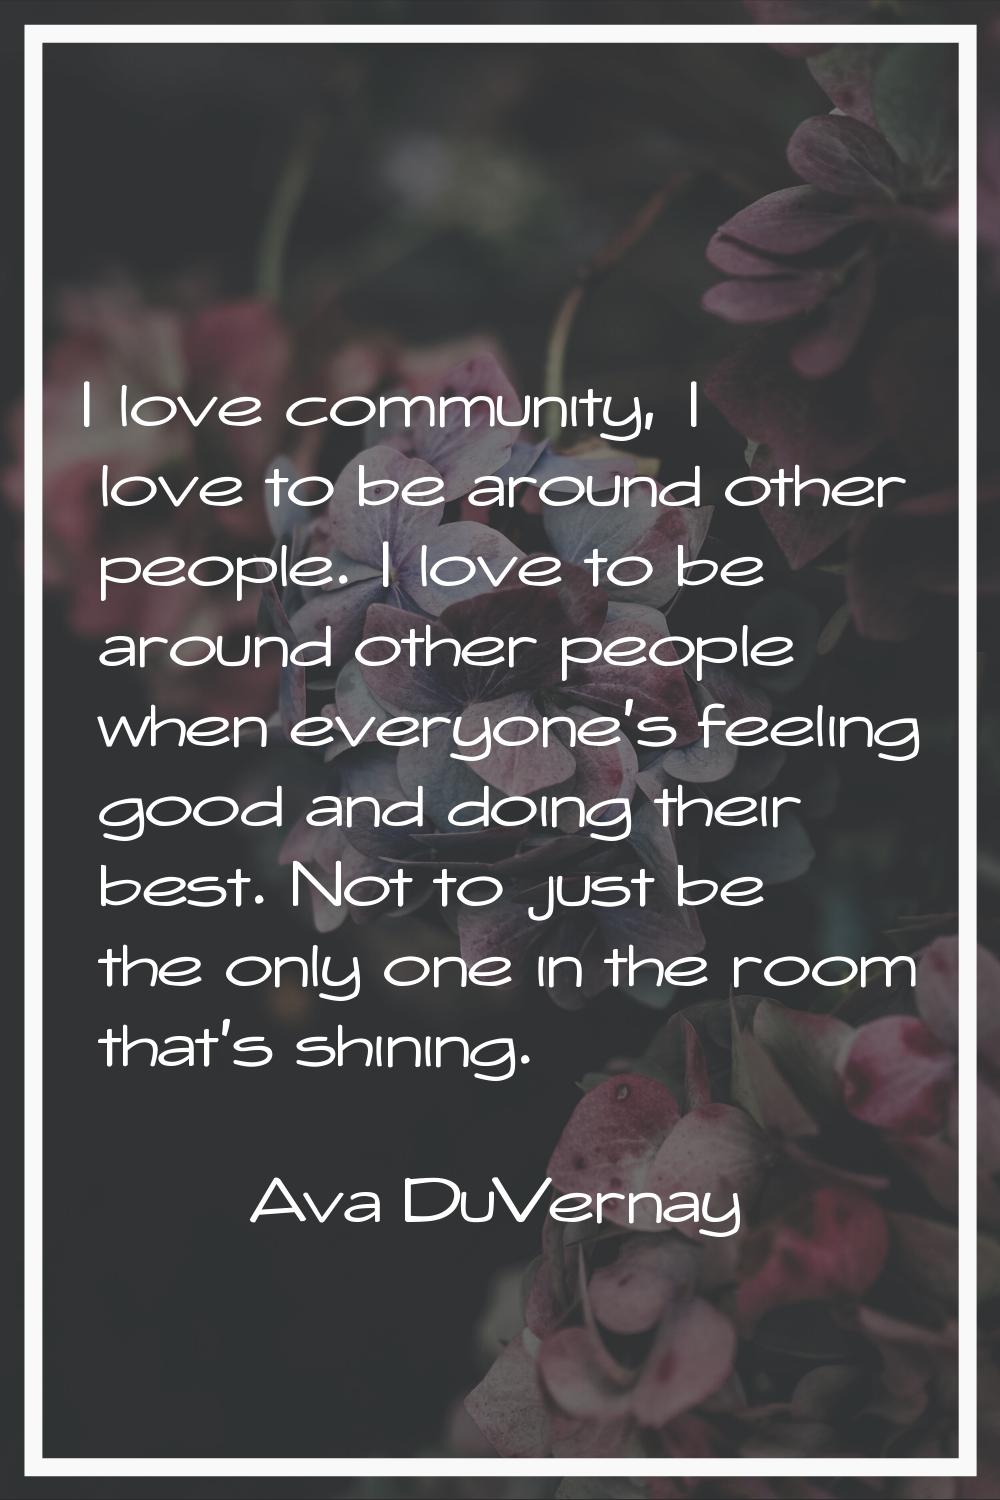 I love community, I love to be around other people. I love to be around other people when everyone'